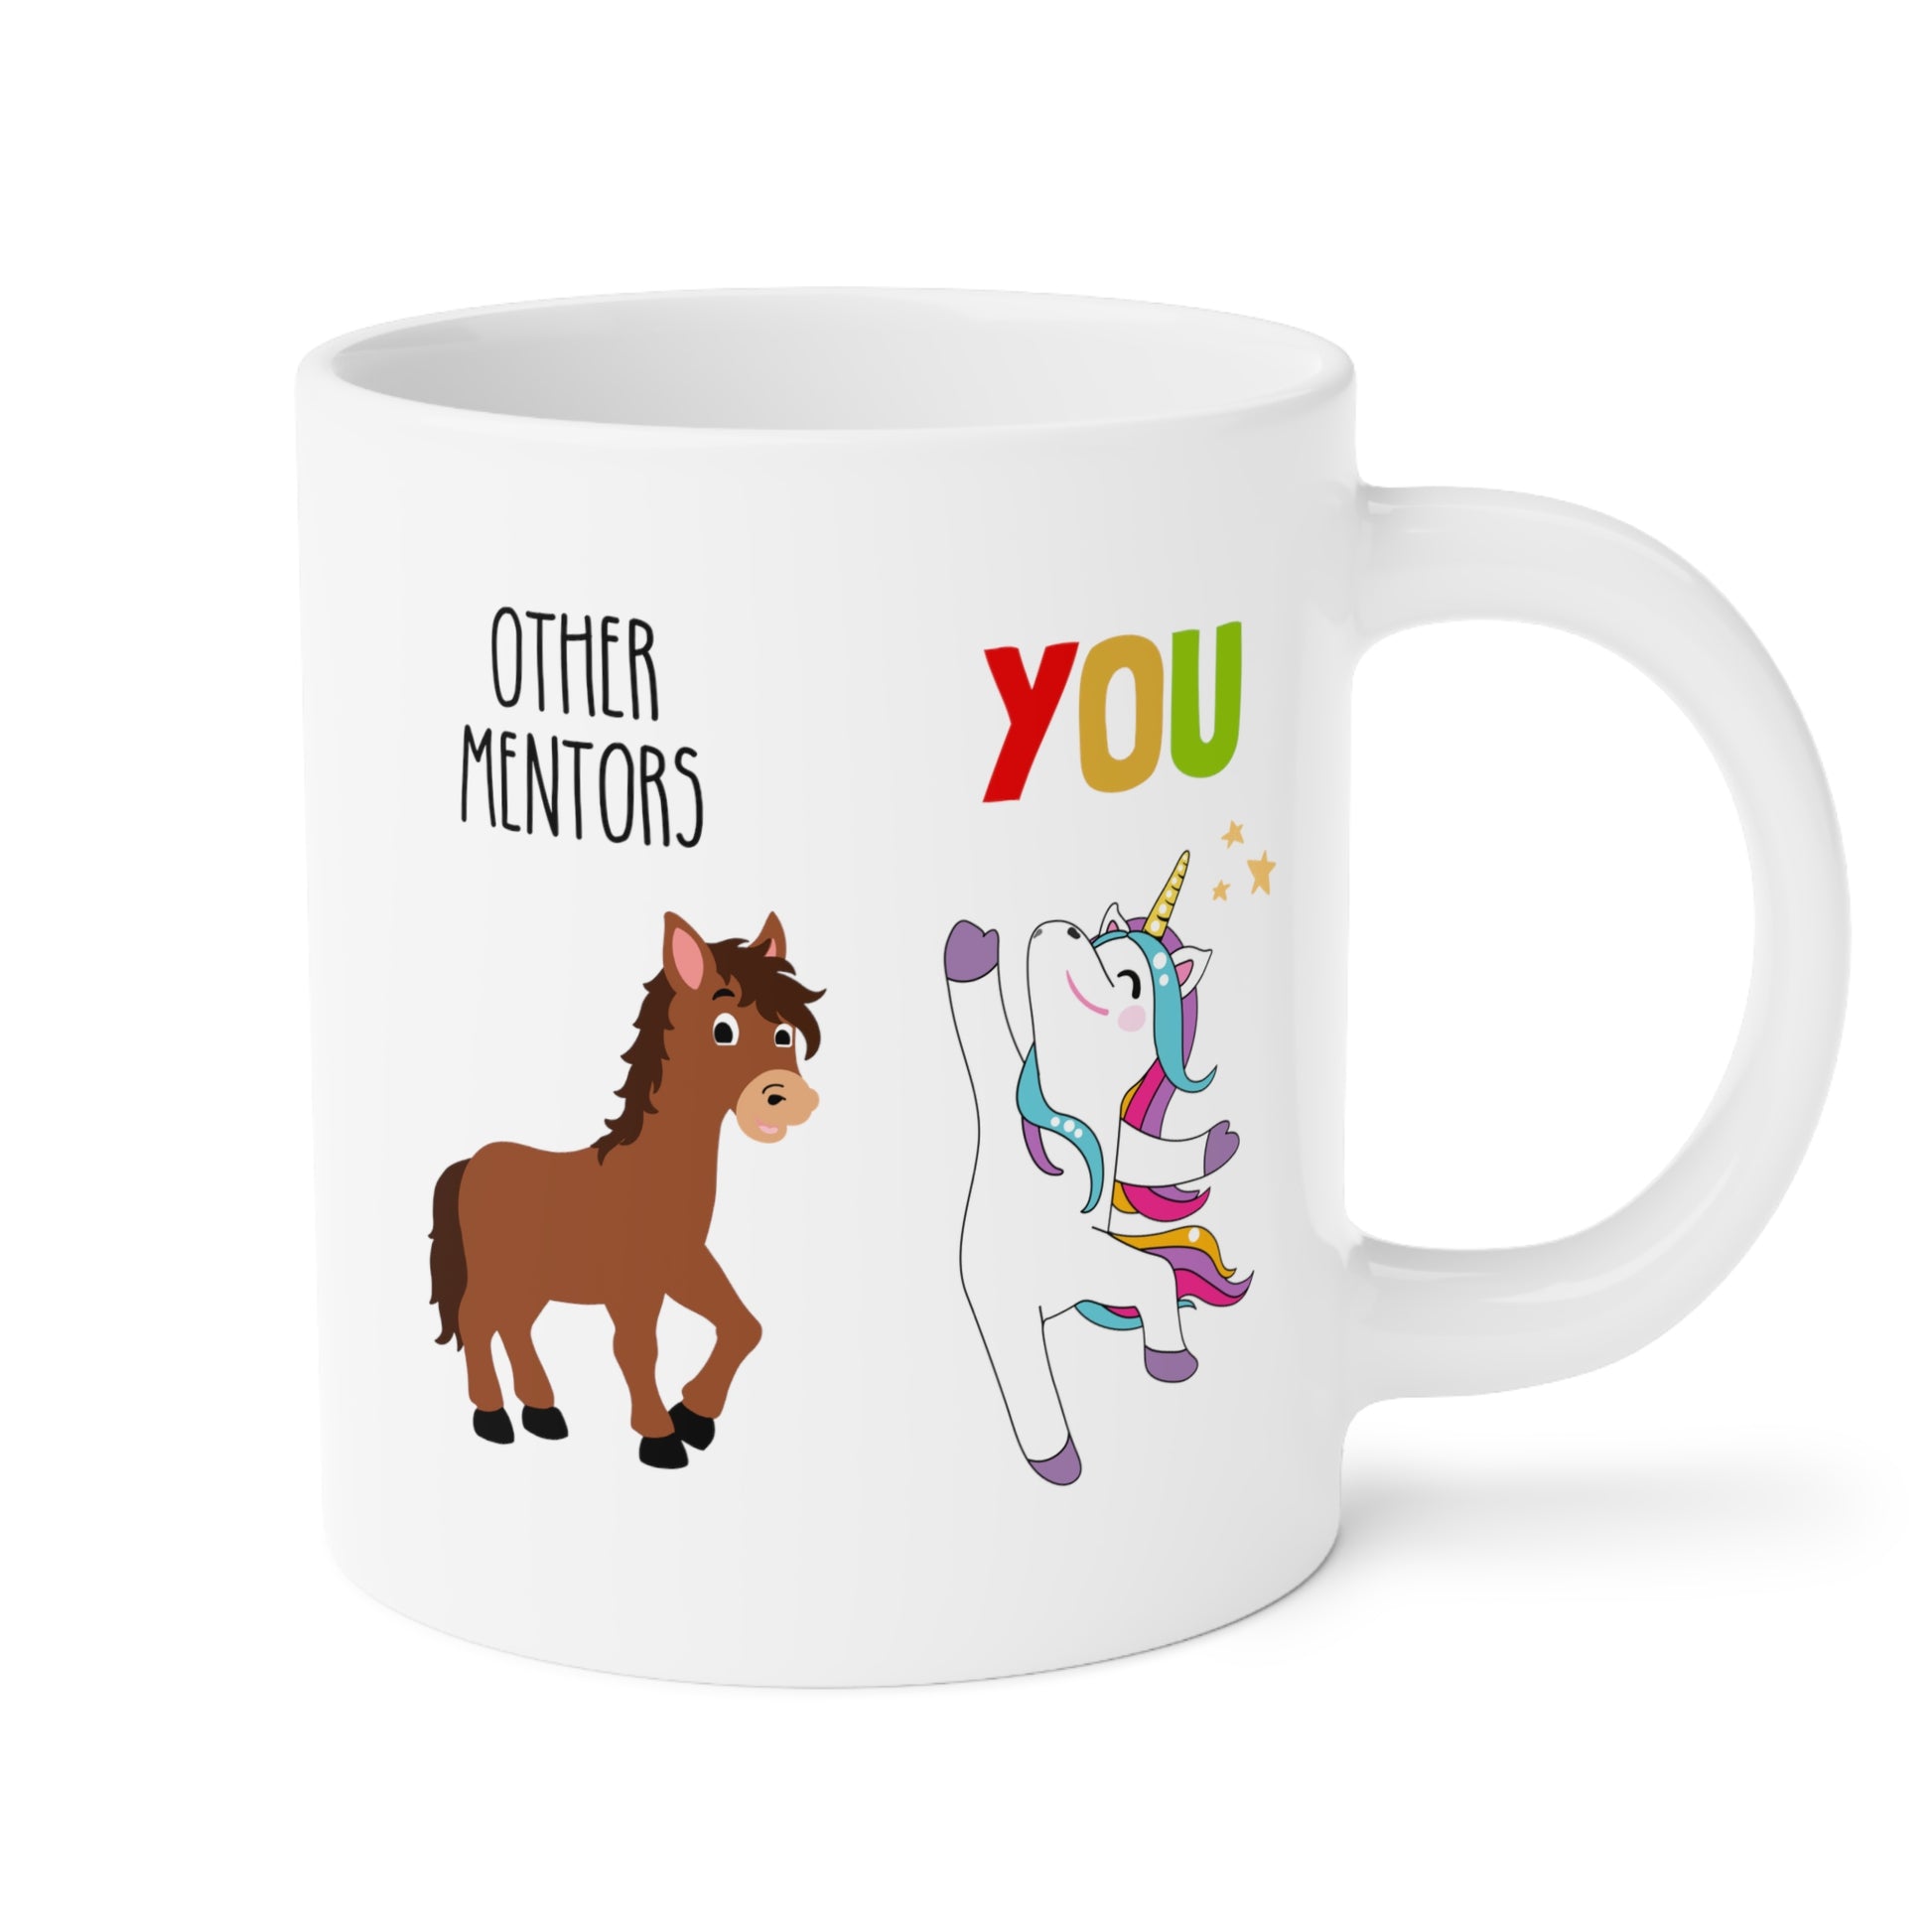 Other Mentors vs You 20oz white funny large coffee mug gift for mentors thank you appreciation waveywares wavey wares wavywares wavy wares